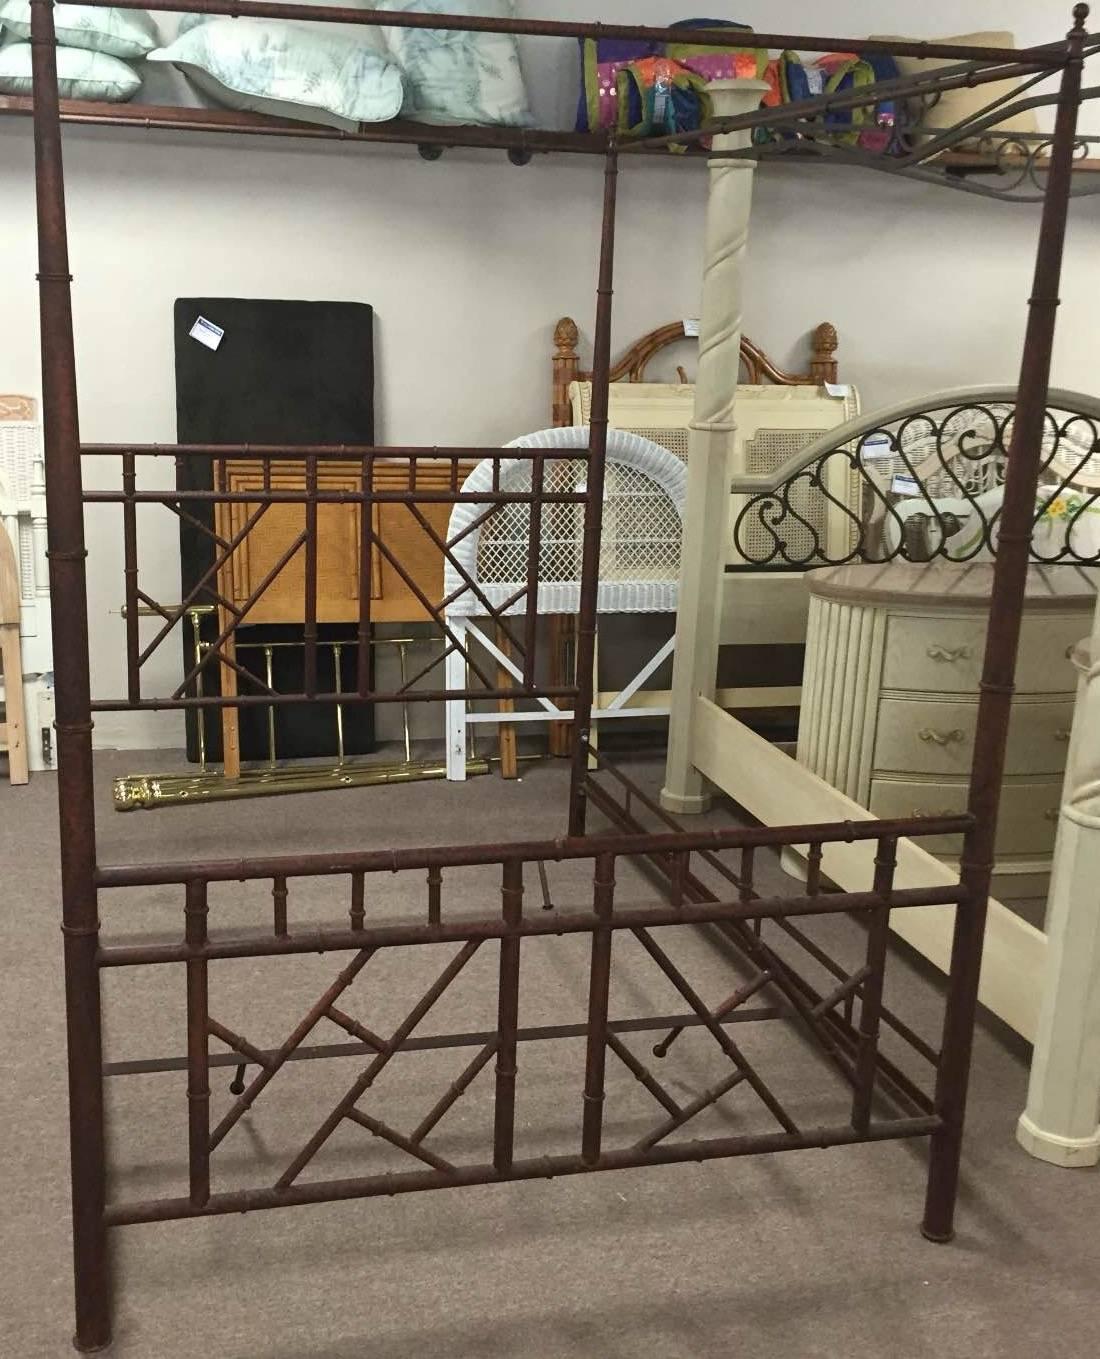 Amazing vintage faux bamboo, Hollywood Regency, Chinese Chippendale, queen size metal canopy bed. Includes Headboard, Footboard, and rails. Perfect for that Palm Beach, tropical look! Wonderful chinoiserie feel!
King-size is also available. 

